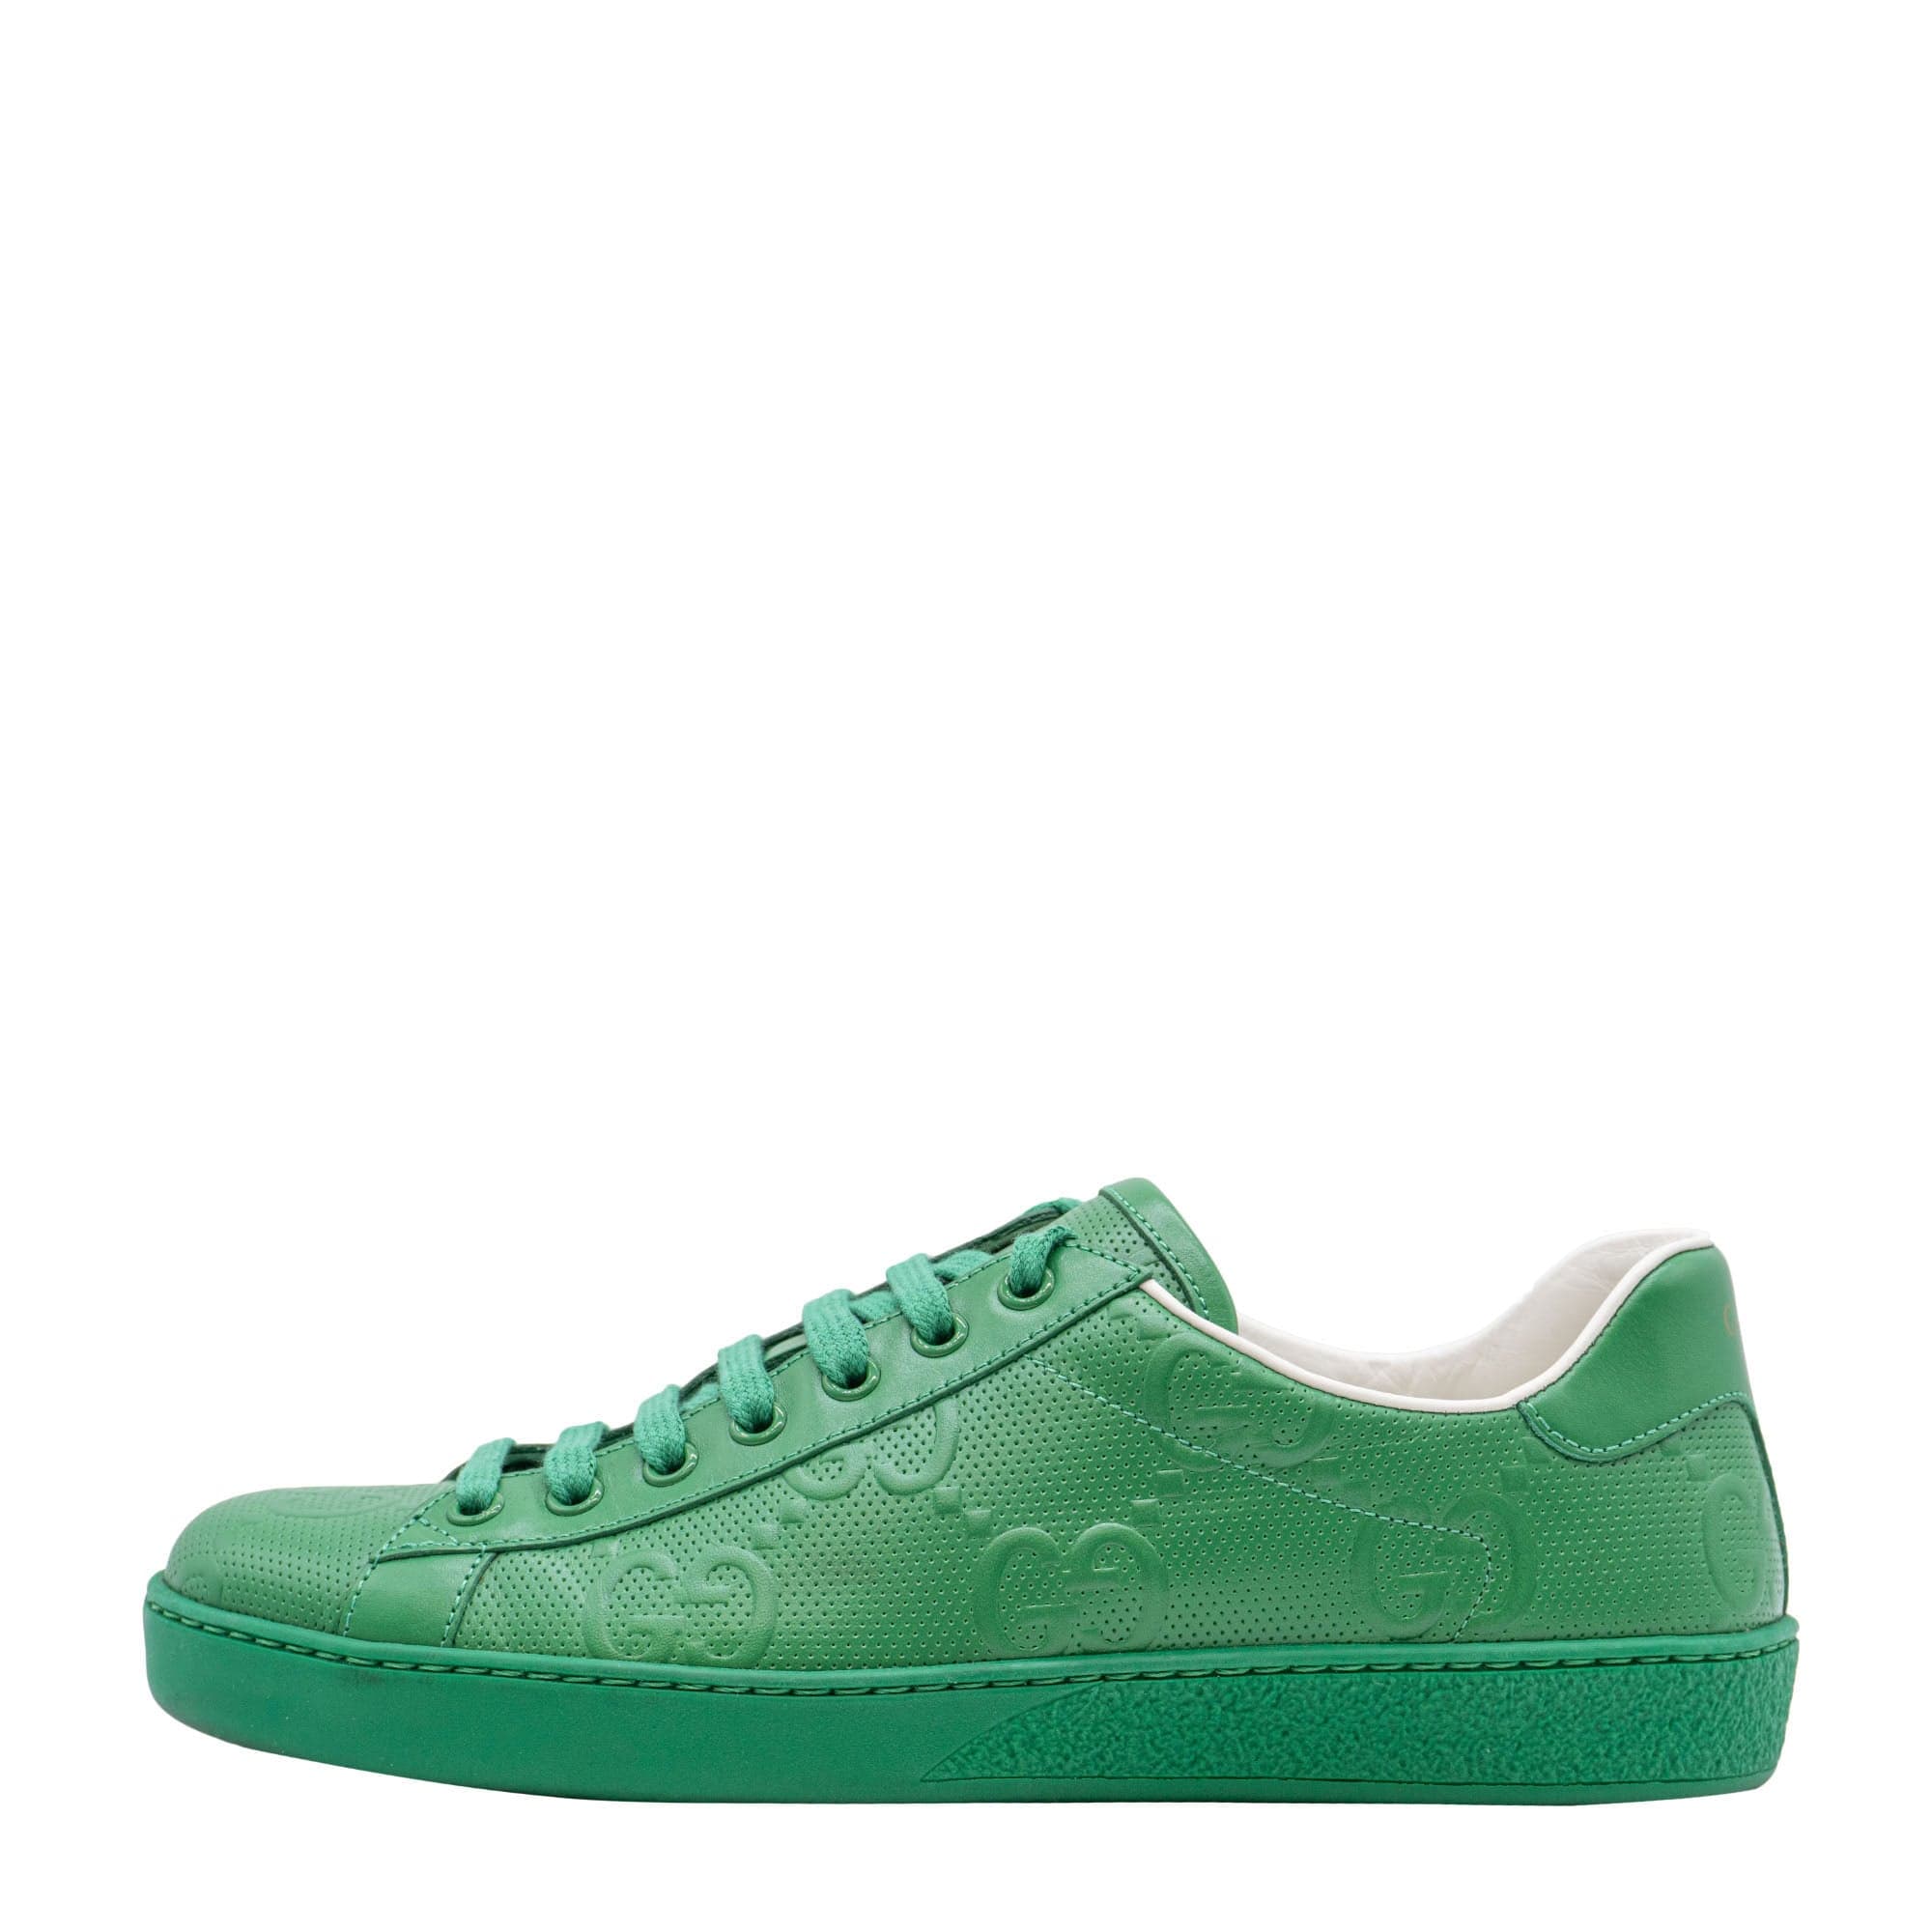 Gucci Gucci Ace GG Leather Embossed Sneakers 6.5 SYCH052